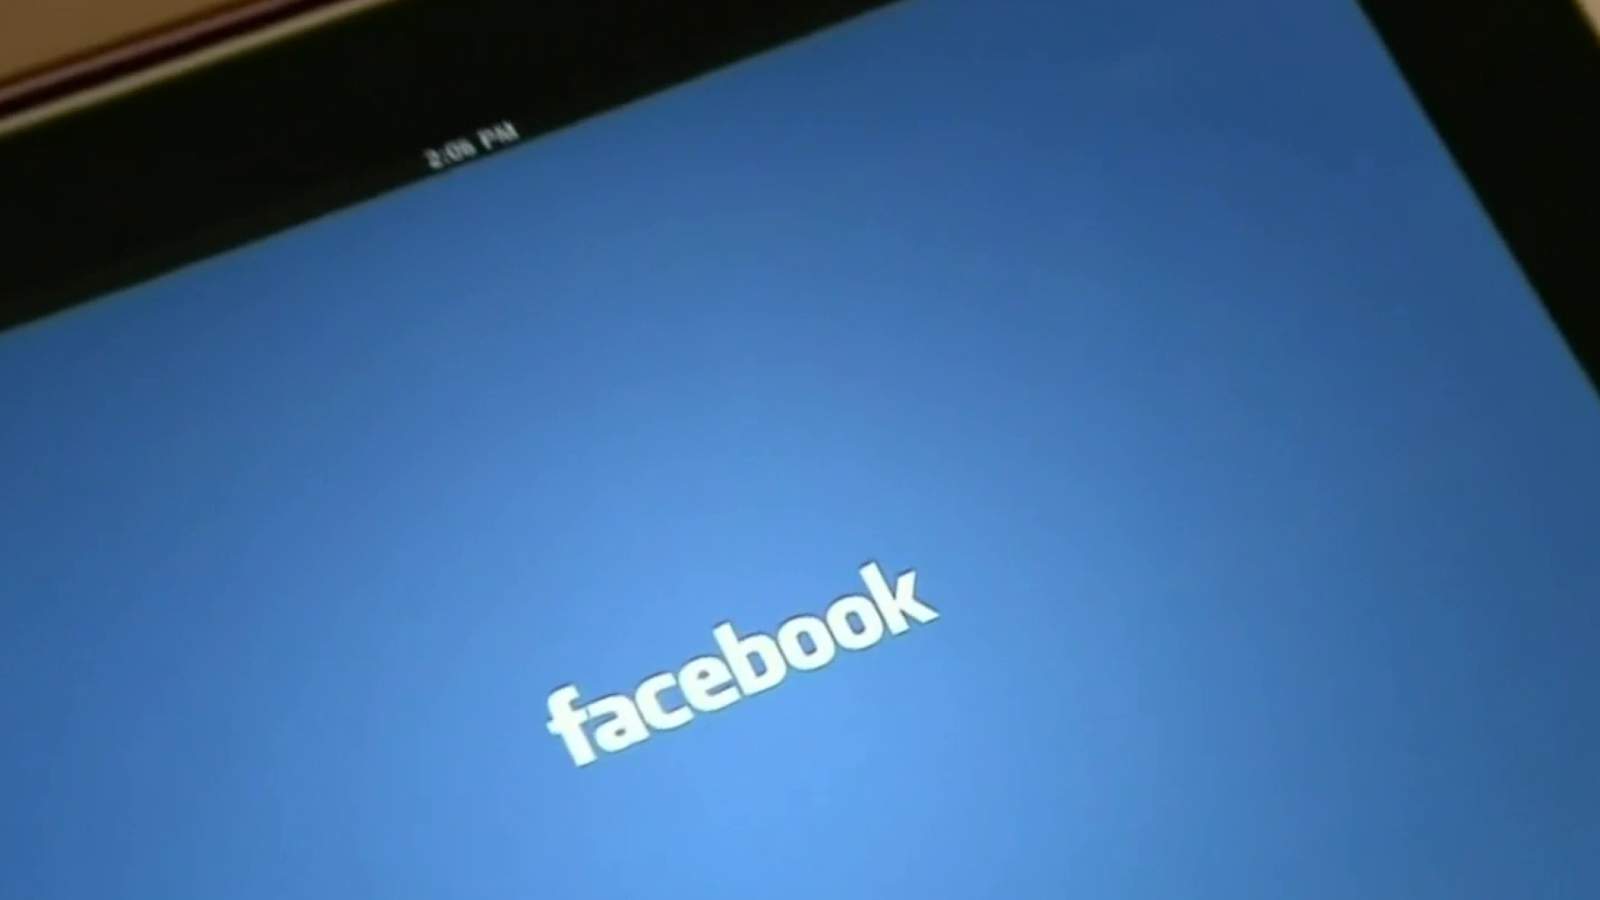 48 attorneys general, Federal Trade Commission file antitrust lawsuit against Facebook